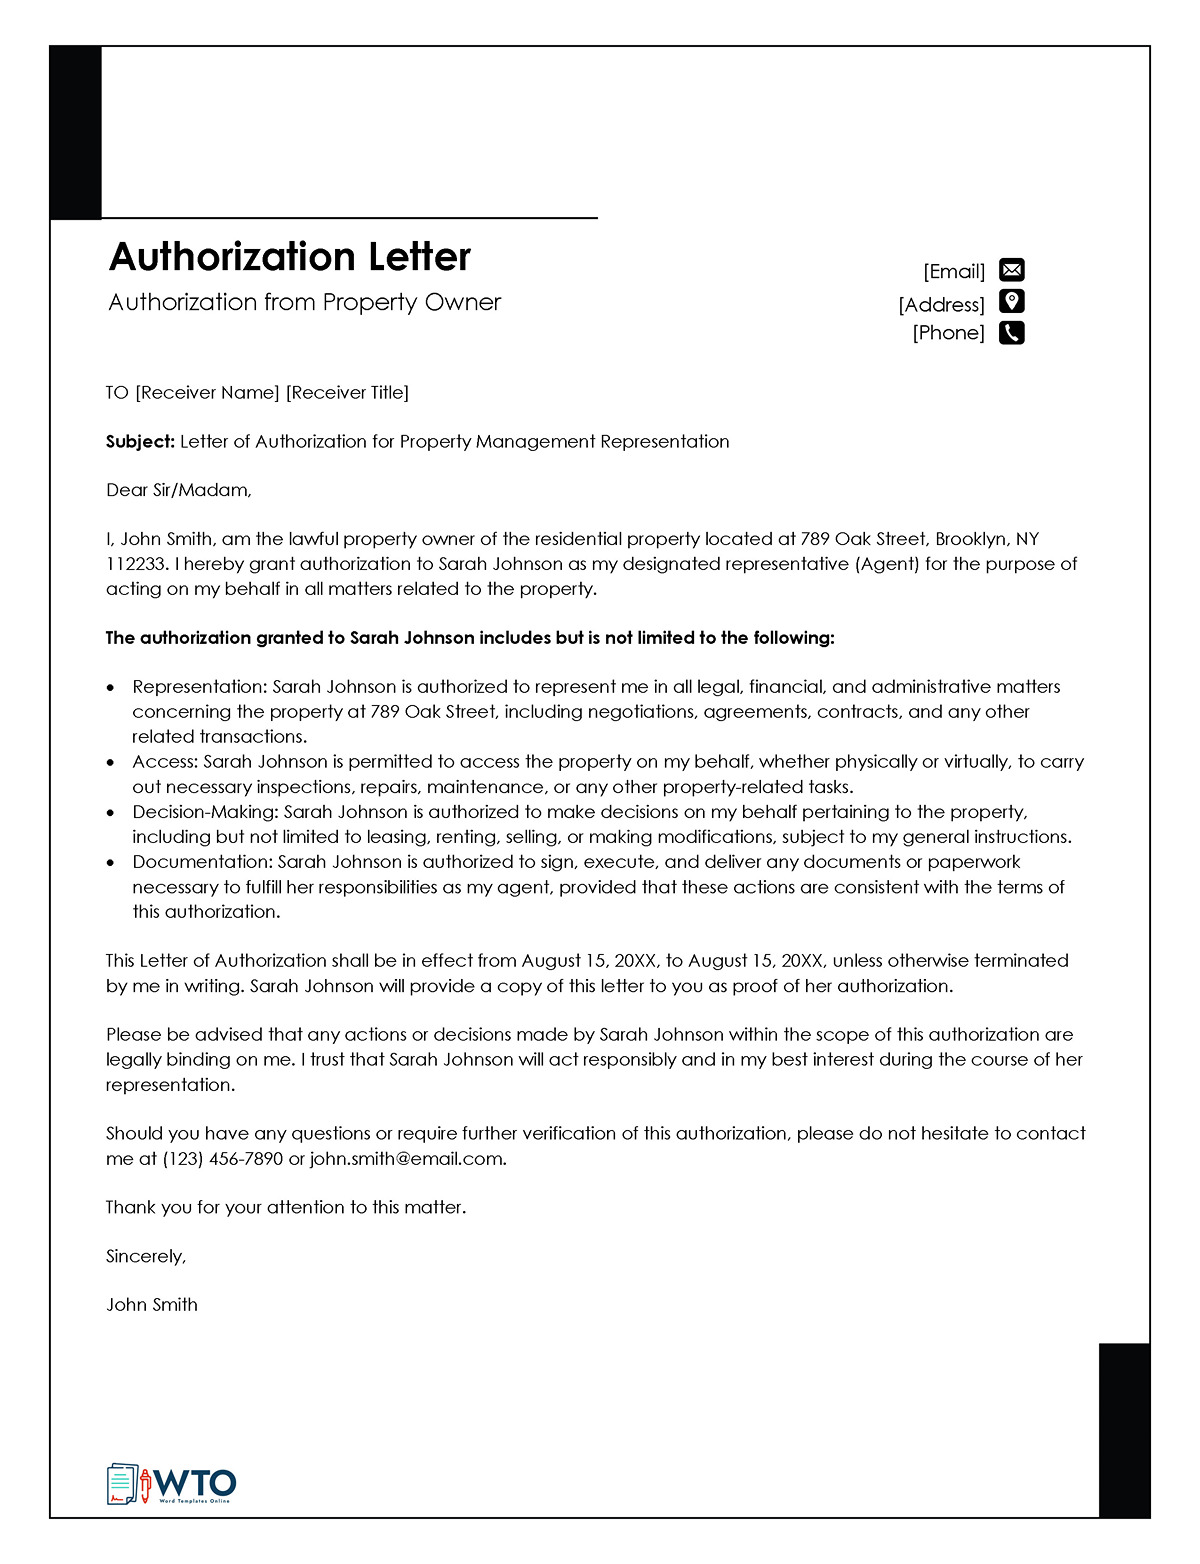 Sample Letter of Authorization from Property Owner-Free Download In Ms Word